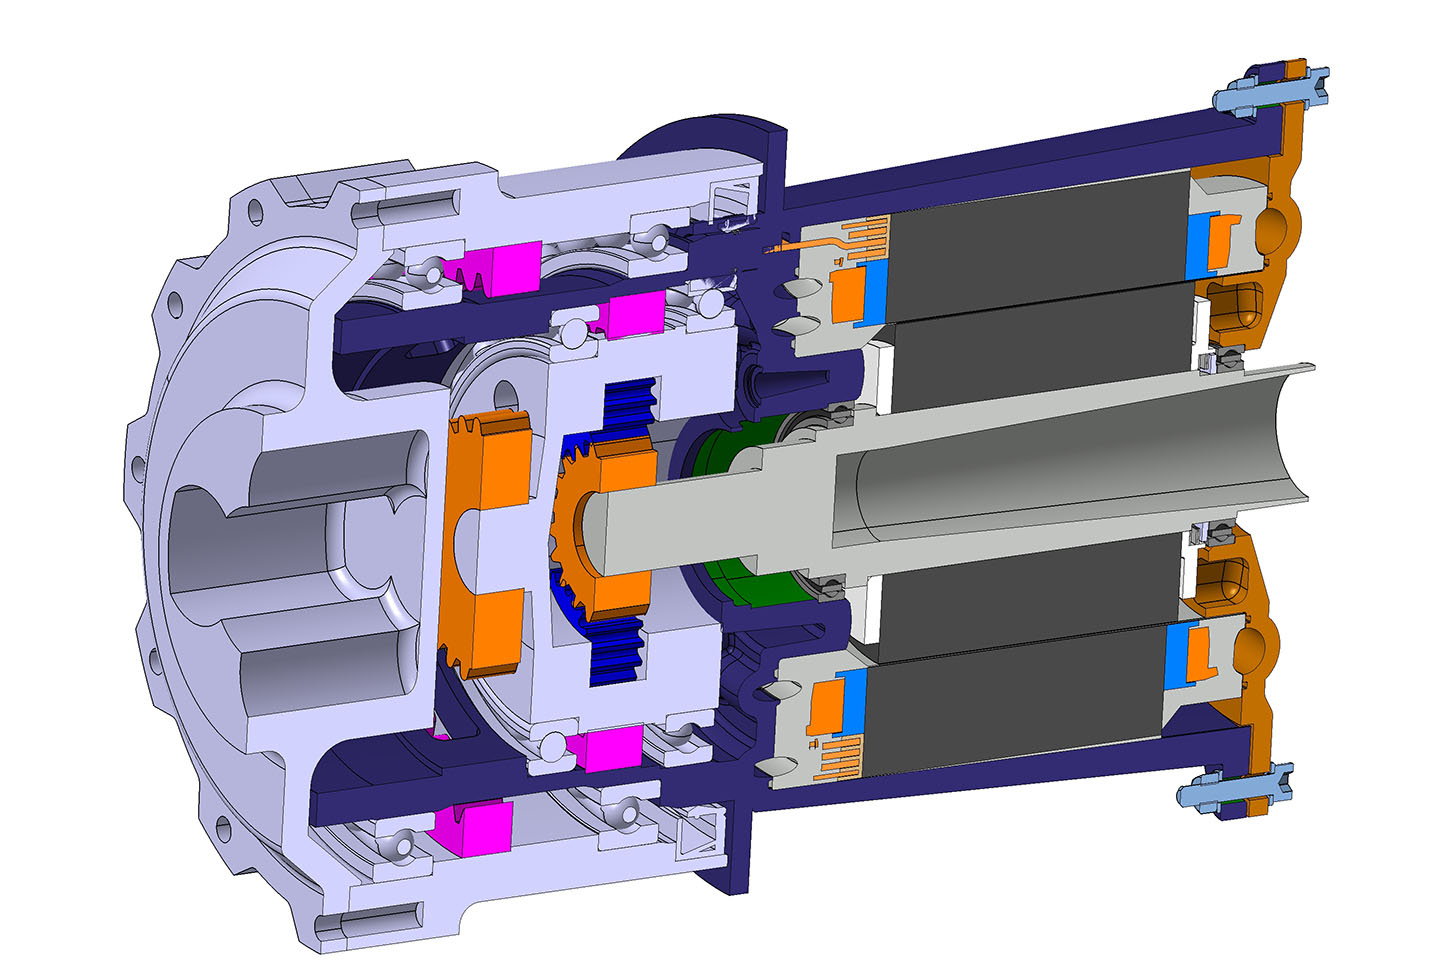 Sectional view of the Lite2Duro electric motor–gearbox unit. Research transfer from the Lite2Duro project into industrial application is demonstrated through the development of an electric motor–gearbox unit